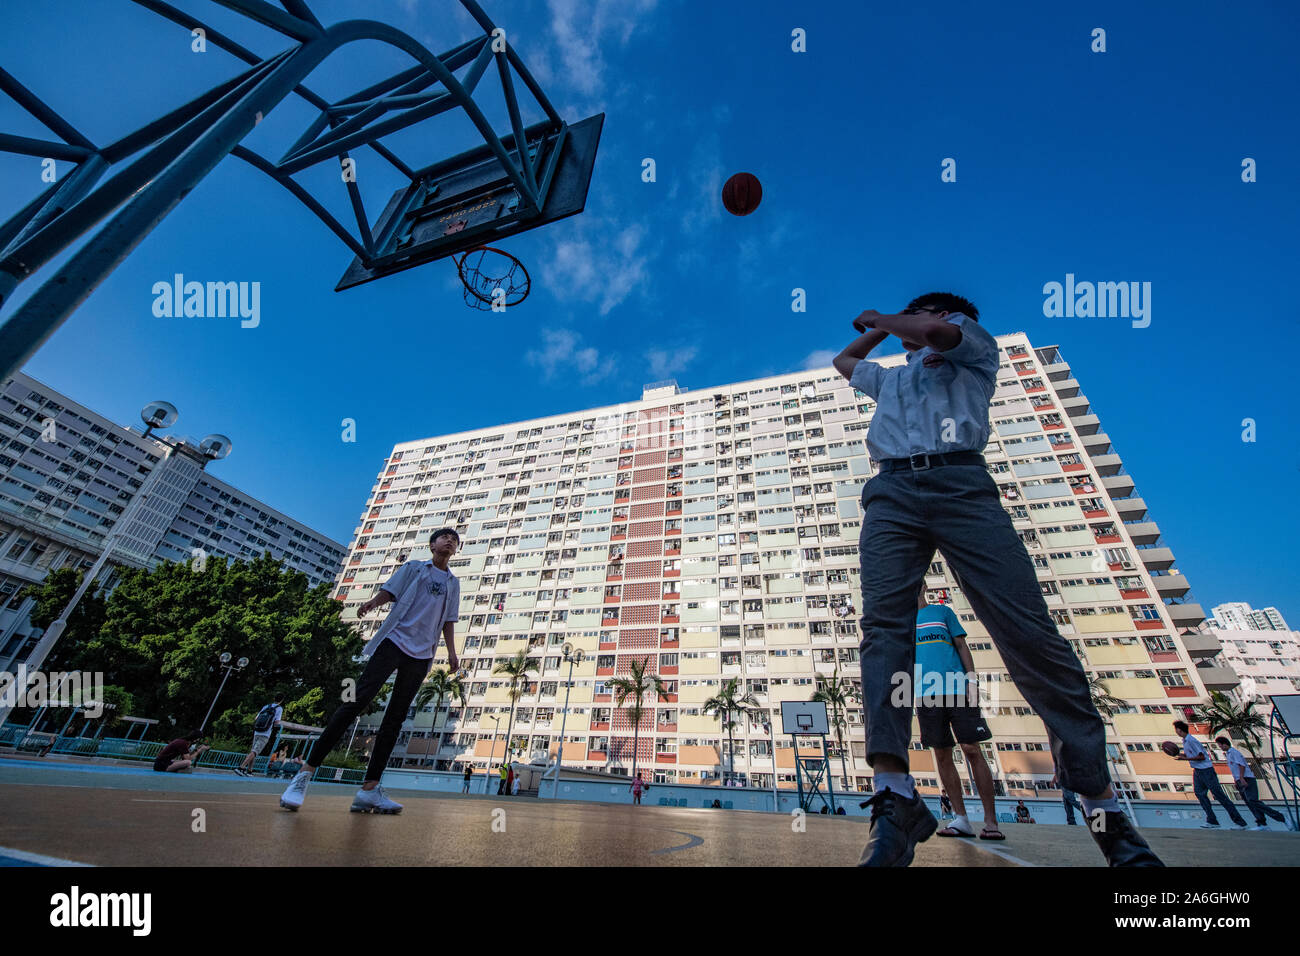 Shooting basket ball hoops in the Choi Hung Estate in Hong Kong Stock Photo